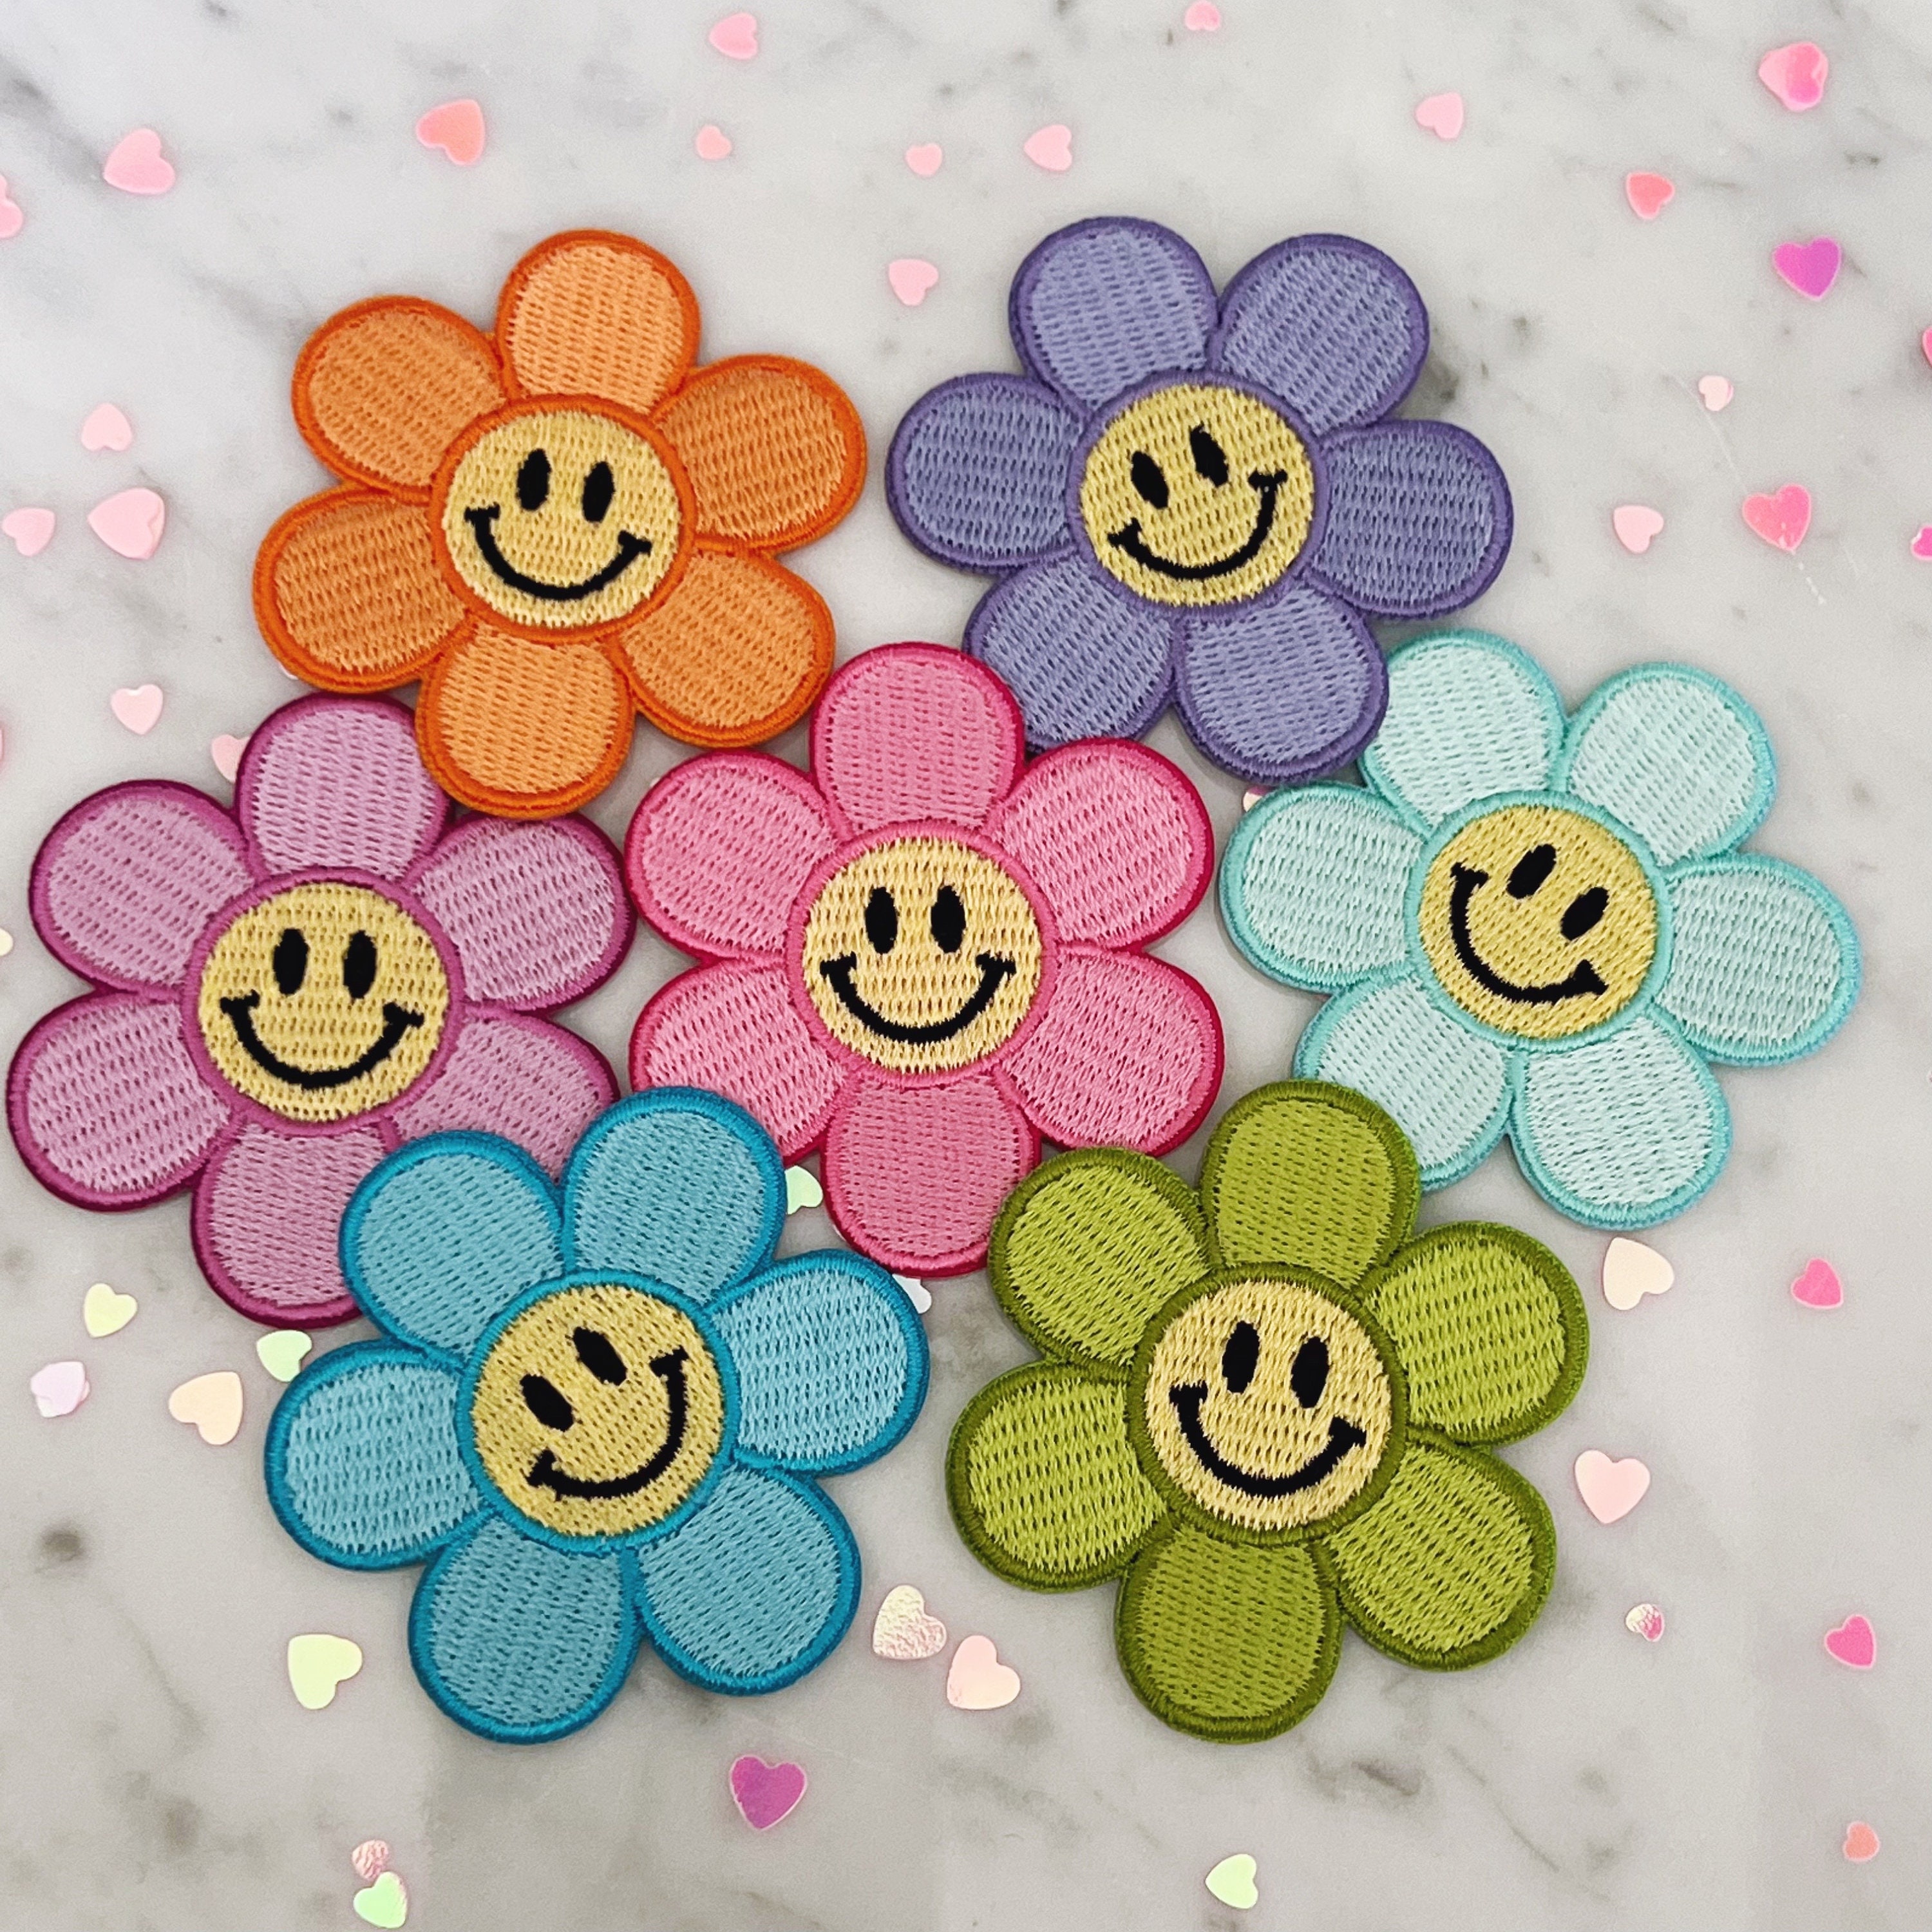 Colorful Cute Smiley Face Heart Iron On Patch - Embroidered Patches for  Jackets, Backpacks, etc. -Red, Pink, Purple, Rainbow, Valentines Day